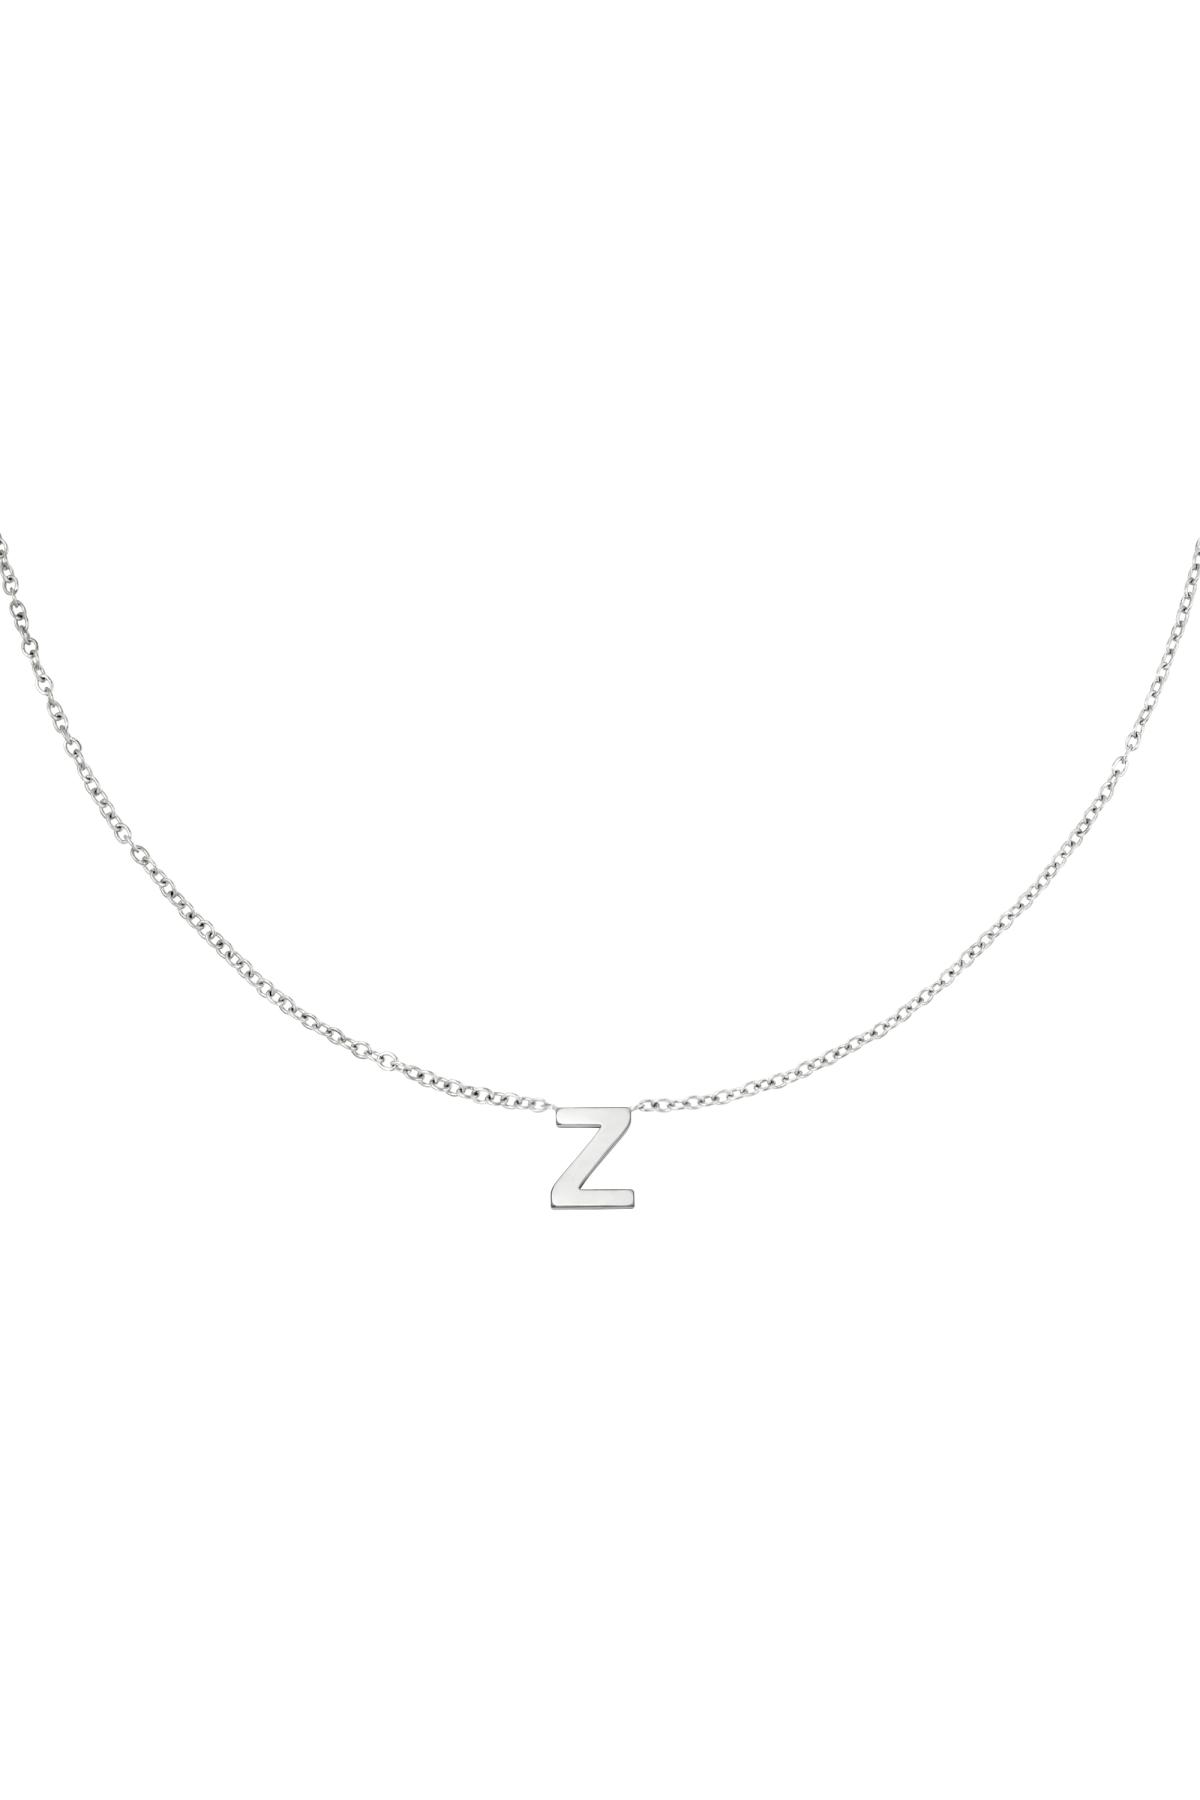 Silver / Stainless steel necklace initial Z Silver Picture24